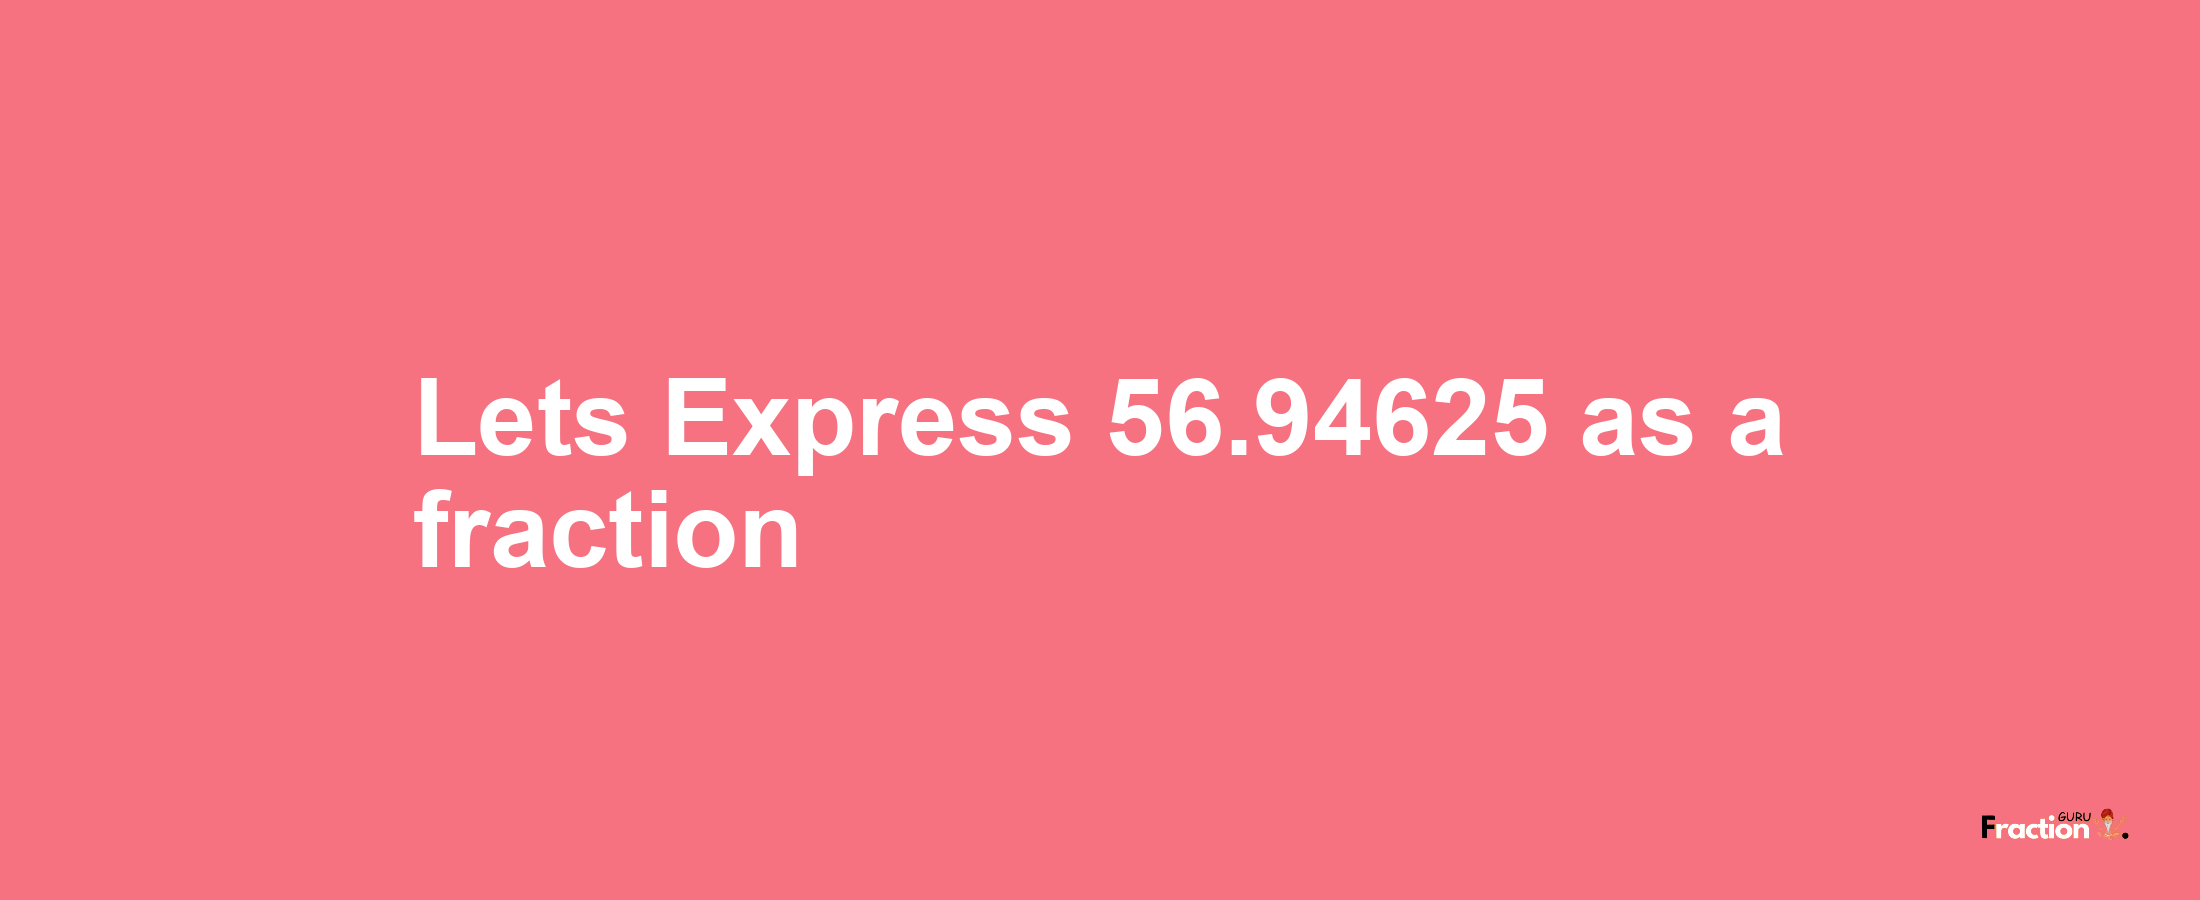 Lets Express 56.94625 as afraction